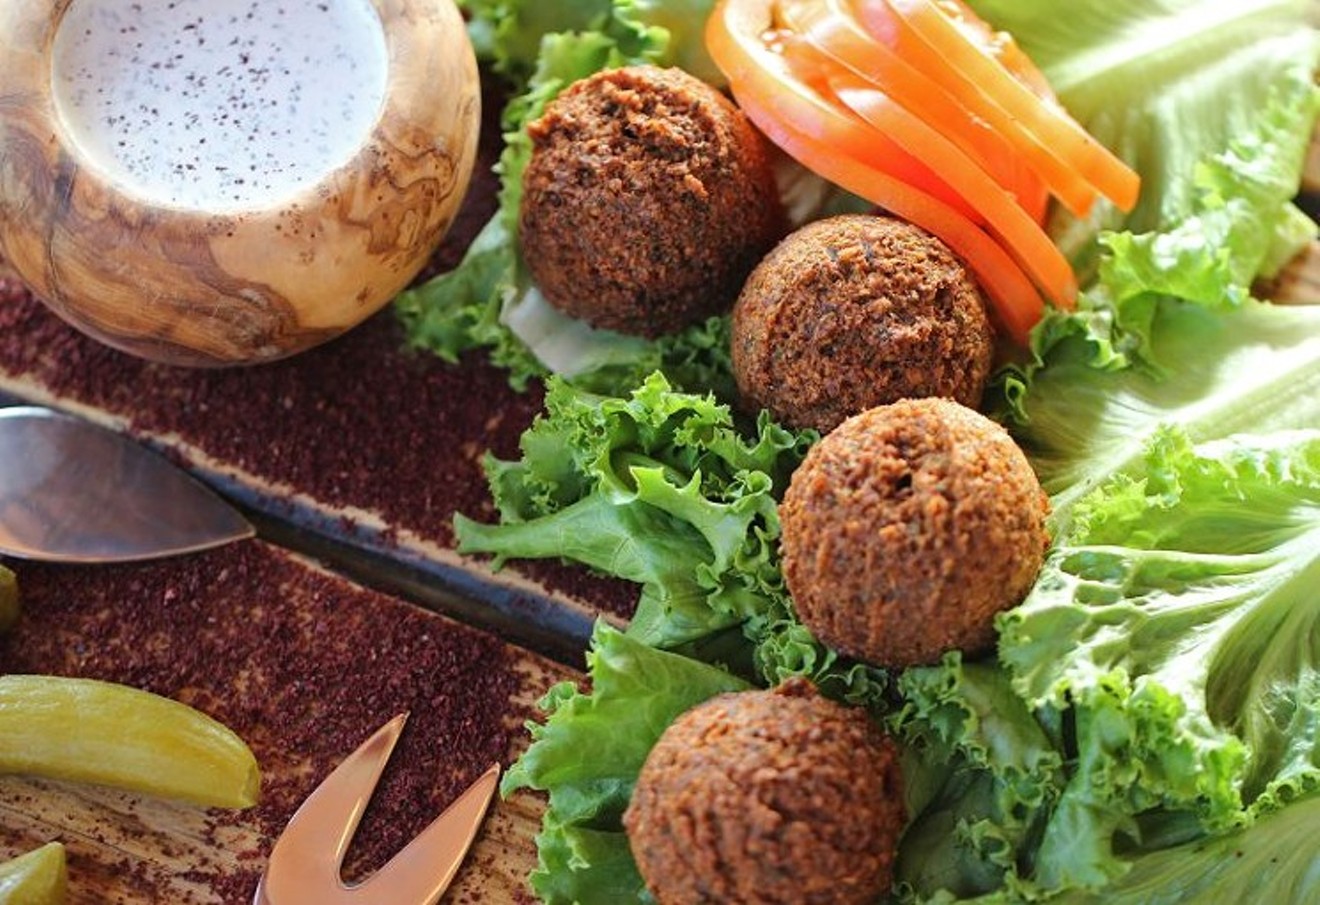 The falafel at Aladdin Mediterranean Cuisine is crisp, flavorful, and pairs beautifully with fresh hummus or baba ganoush.